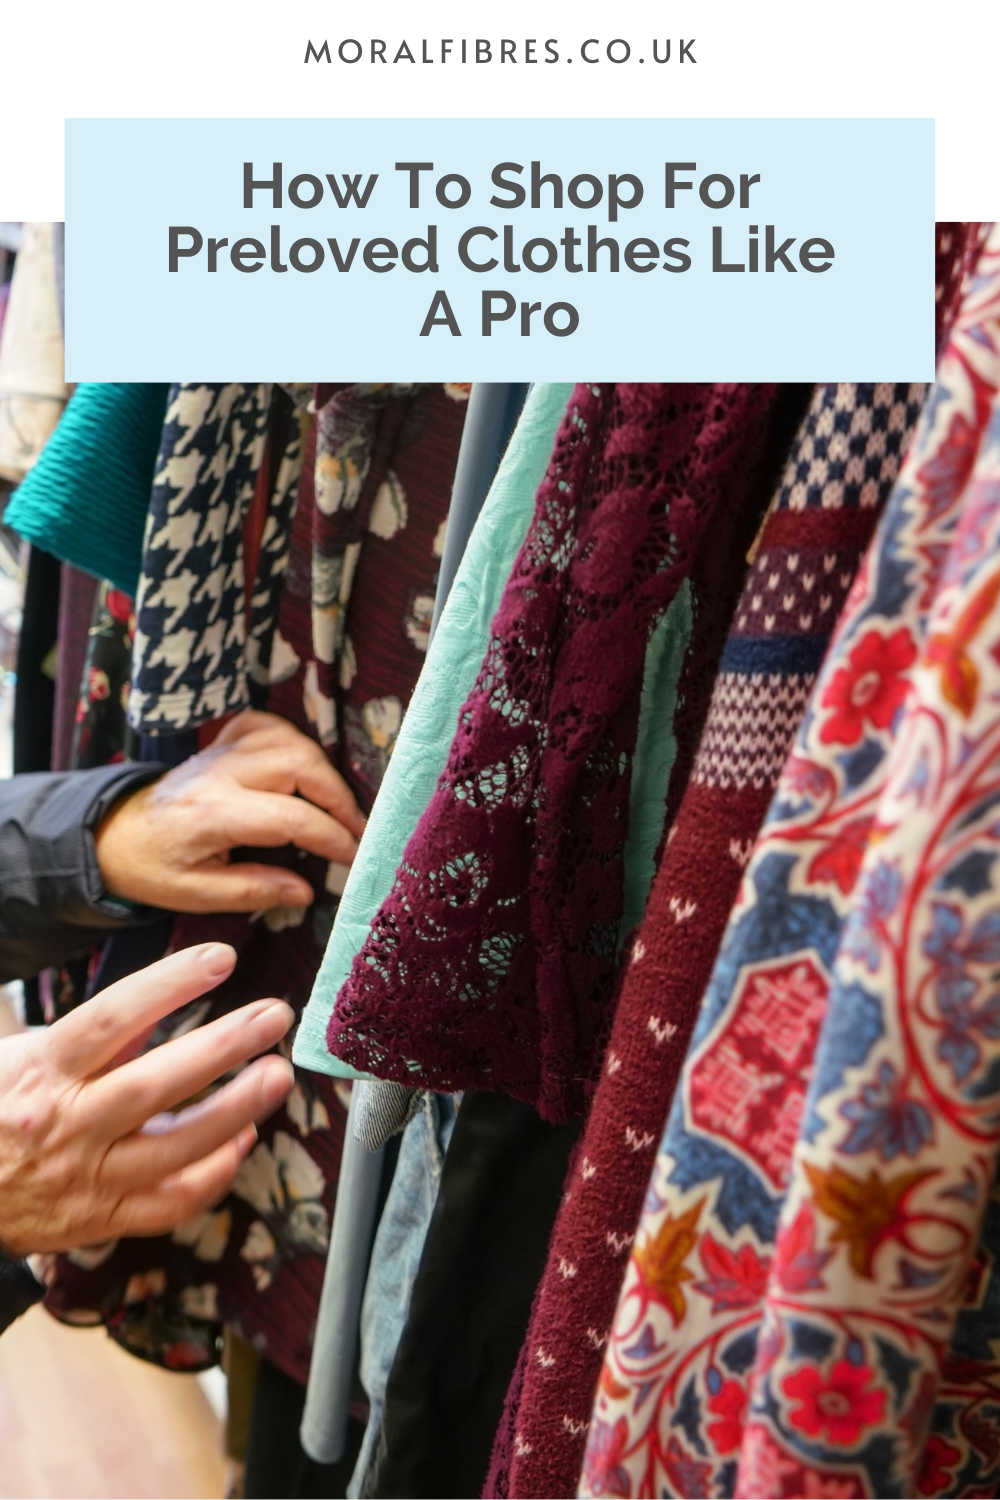 A person looking through a rail of secondhand clothing with a blue text box that reads how to shop for preloved clothes like a pro.